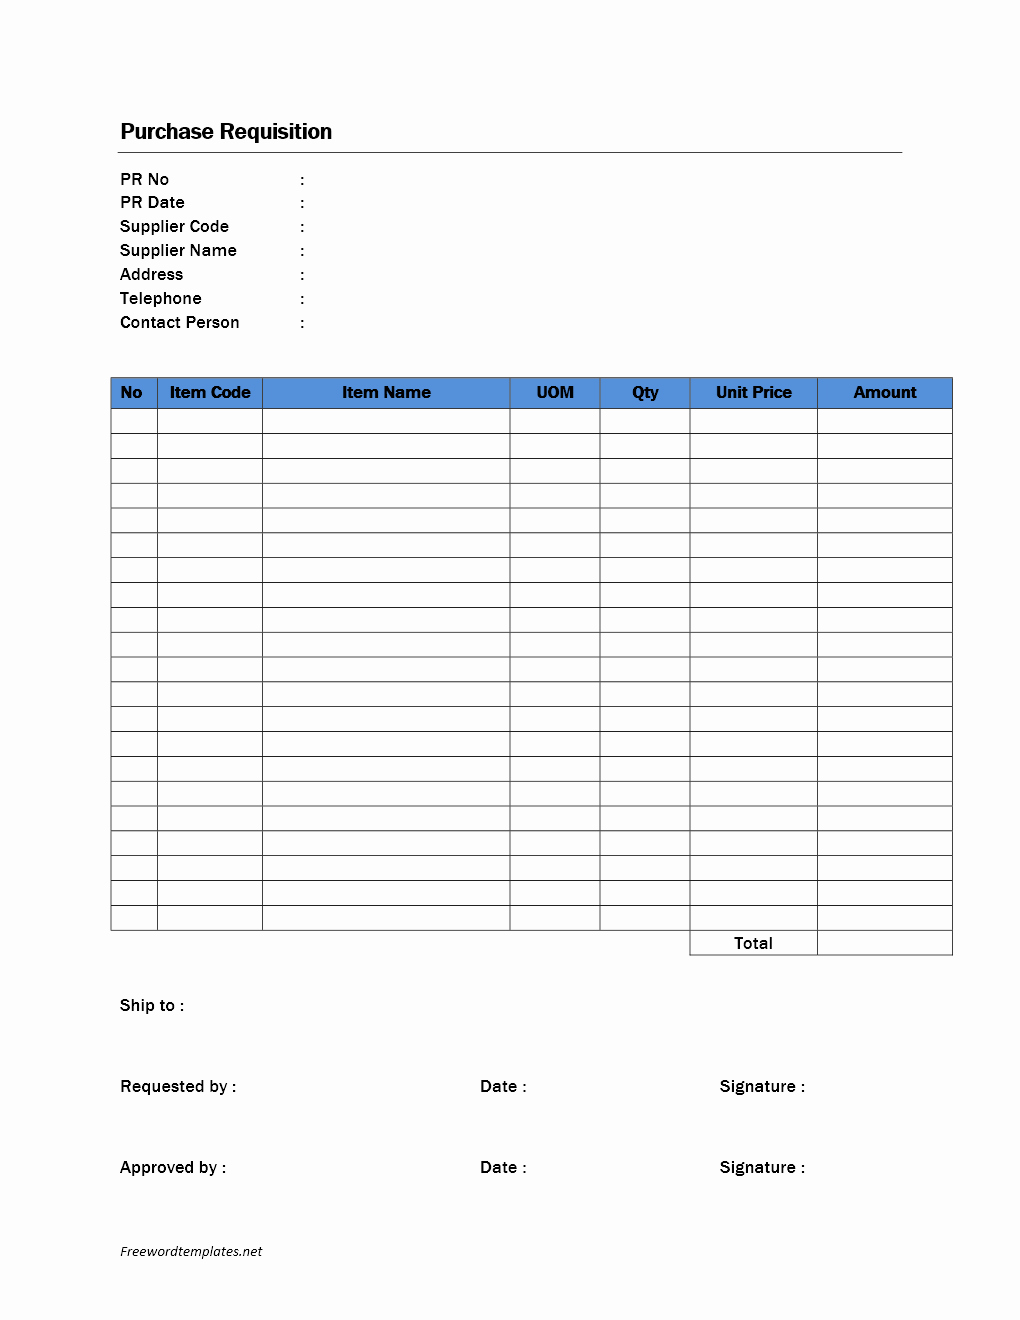 Purchase Requisition form Template Awesome Purchase Requisition form